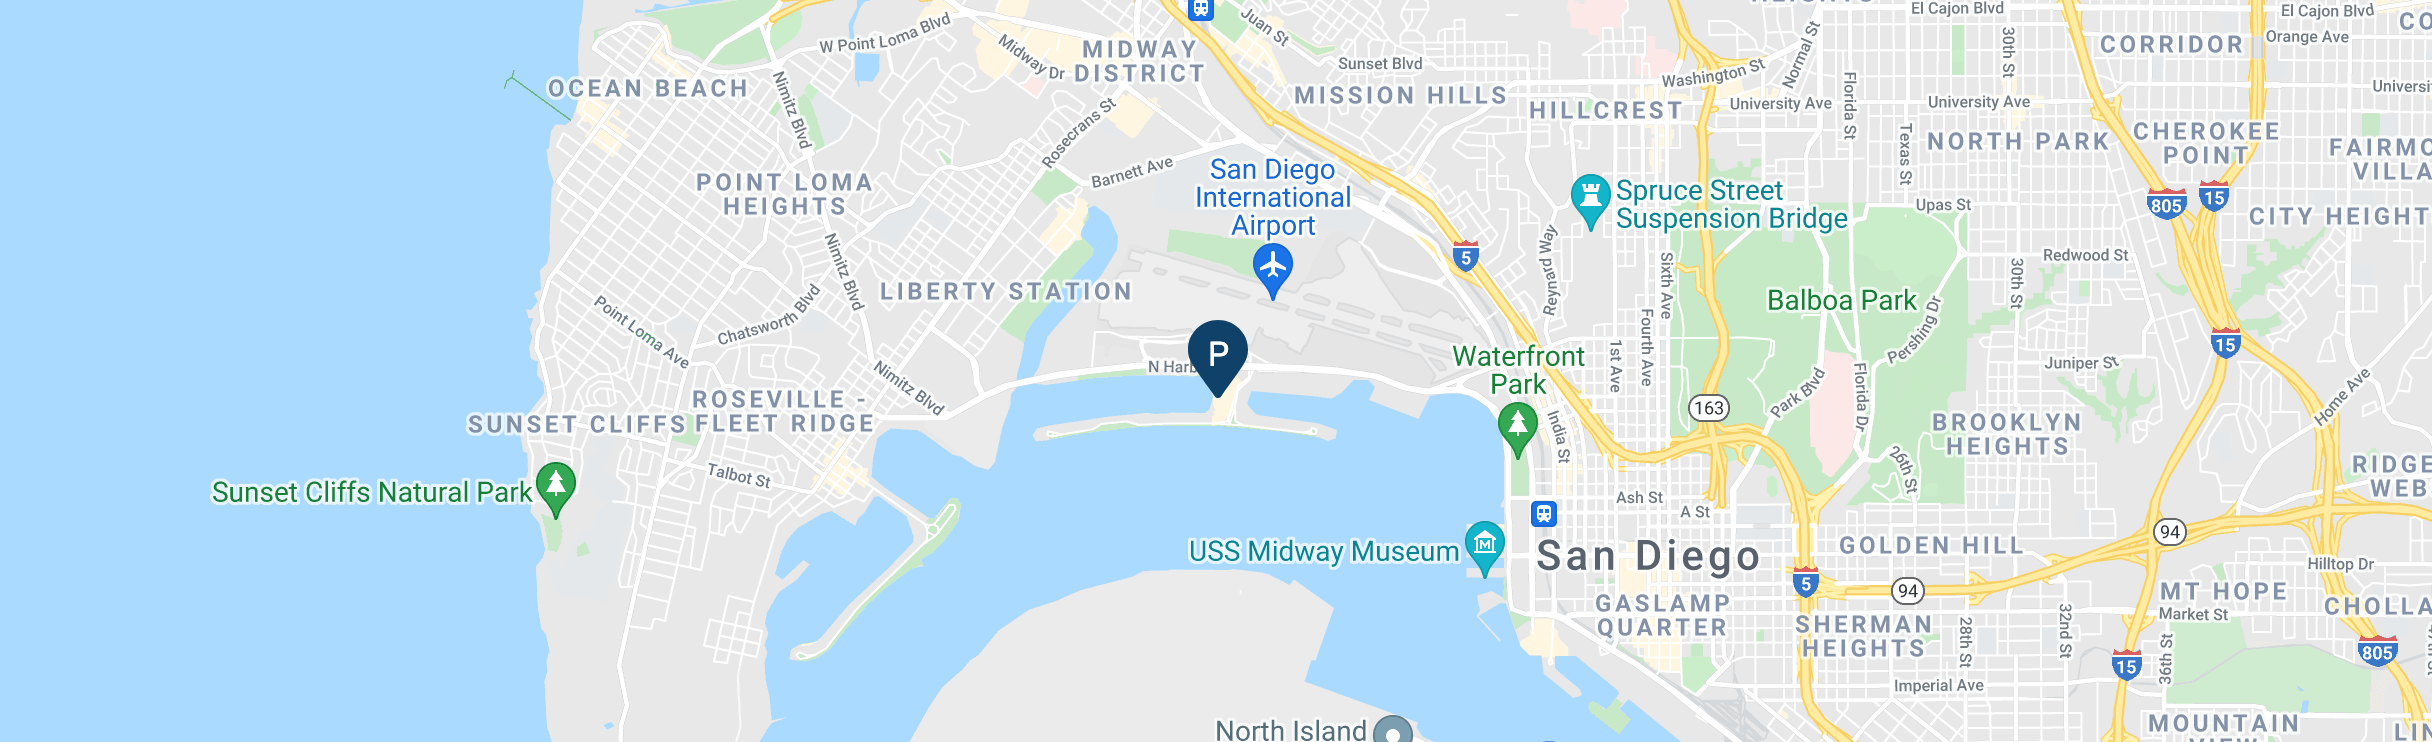 sheraton-area-map.png